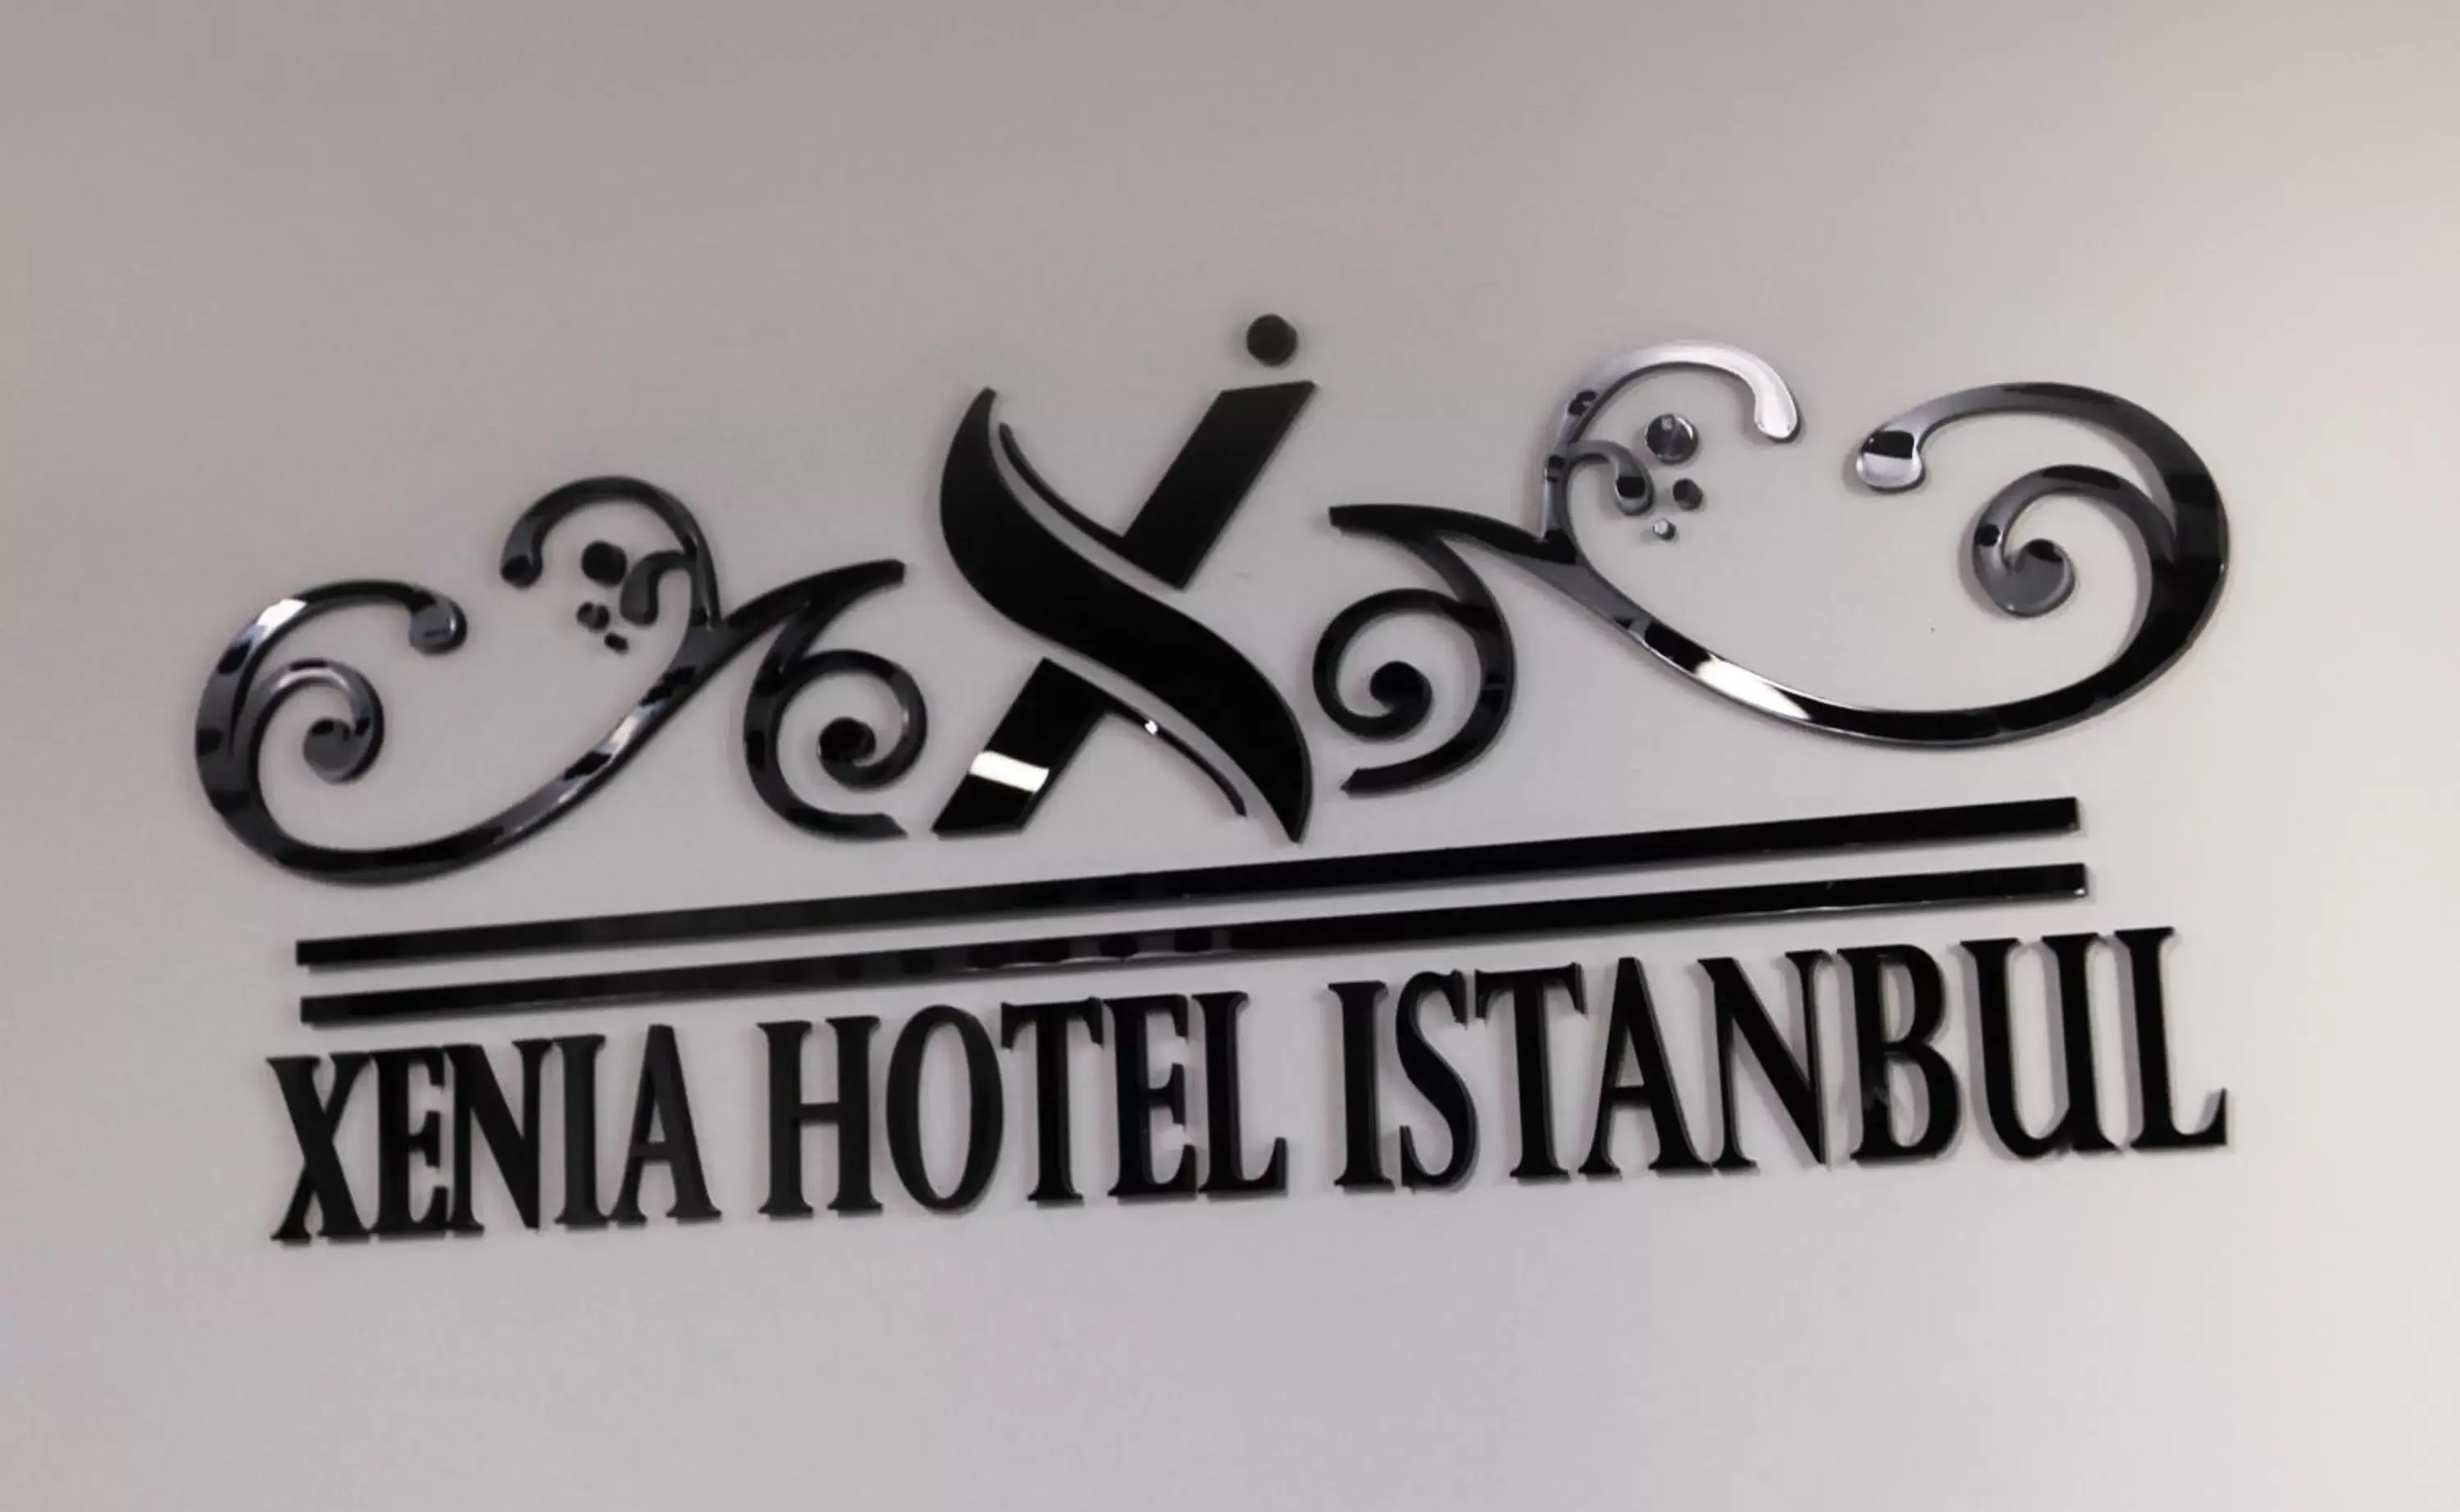 Property logo or sign in Xenia Hotel Istanbul